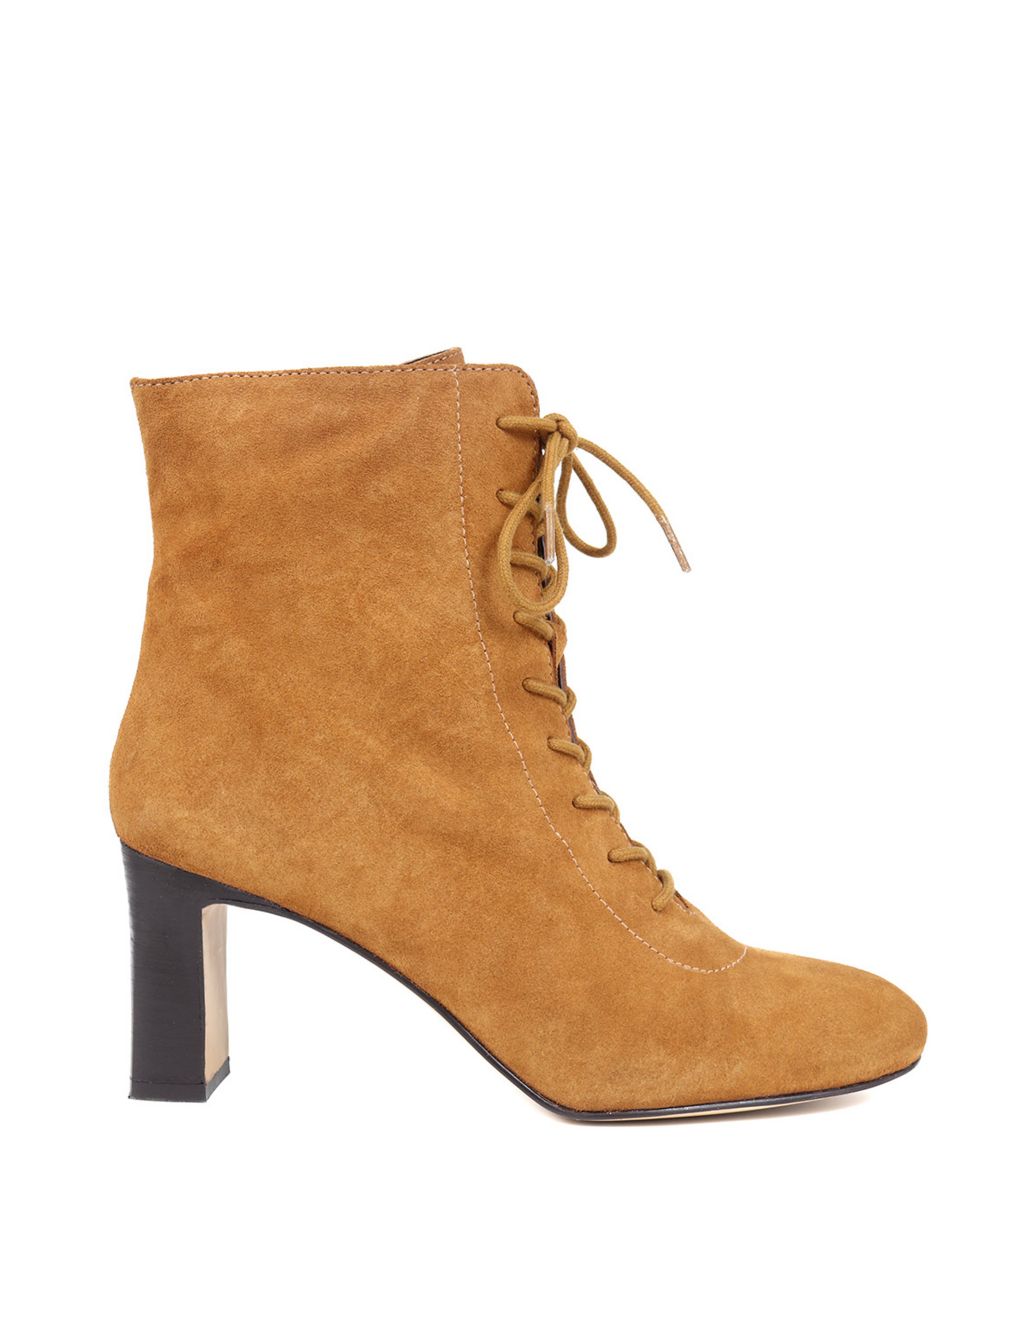 Suede Lace Up Block Heel Ankle Boots image 1